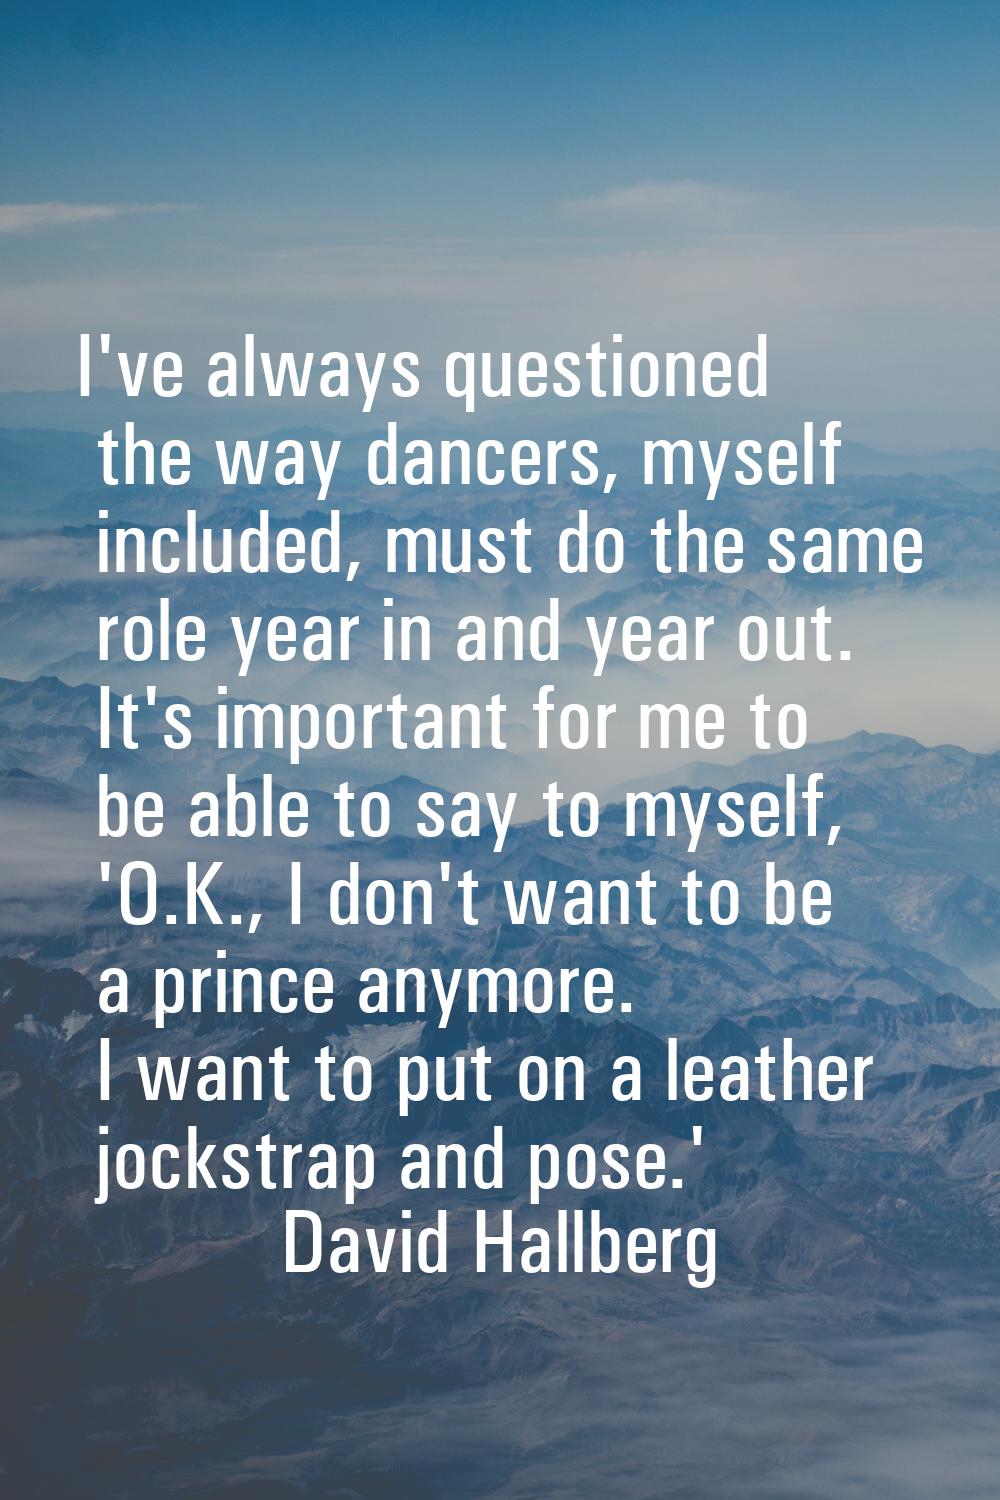 I've always questioned the way dancers, myself included, must do the same role year in and year out